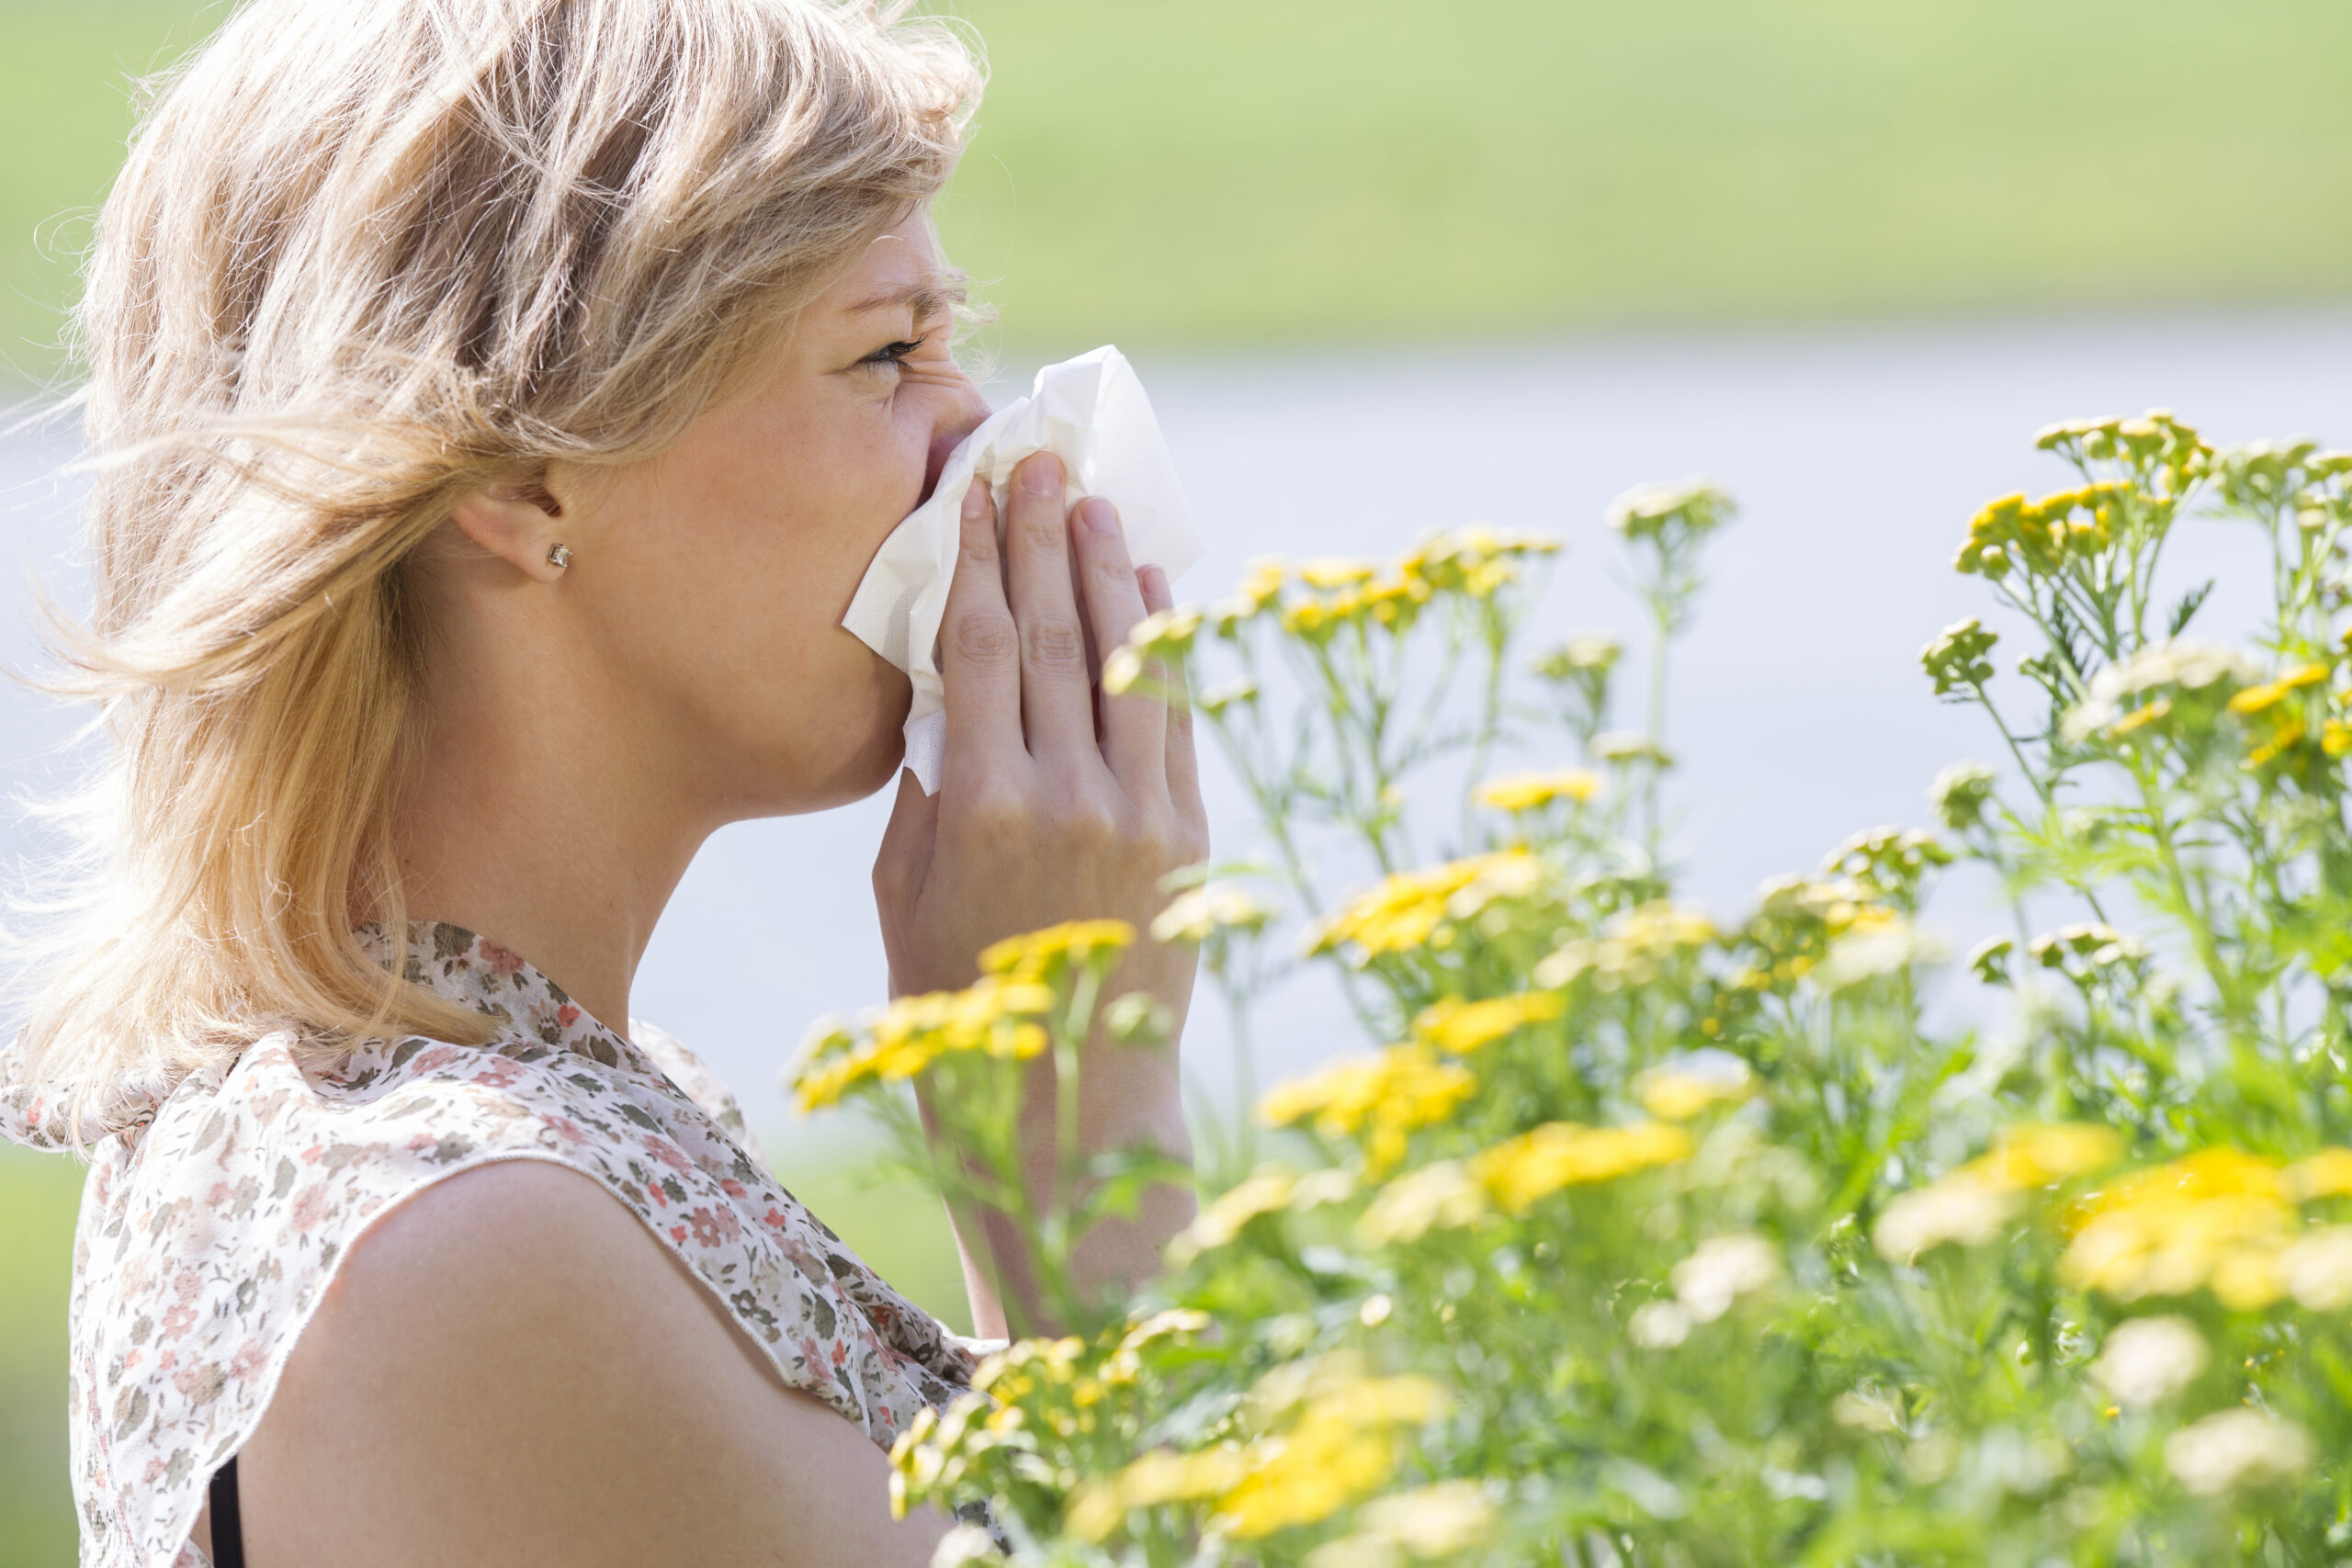 Side view of woman blowing nose into tissue in front of flowers. Pressure Wash Pollen